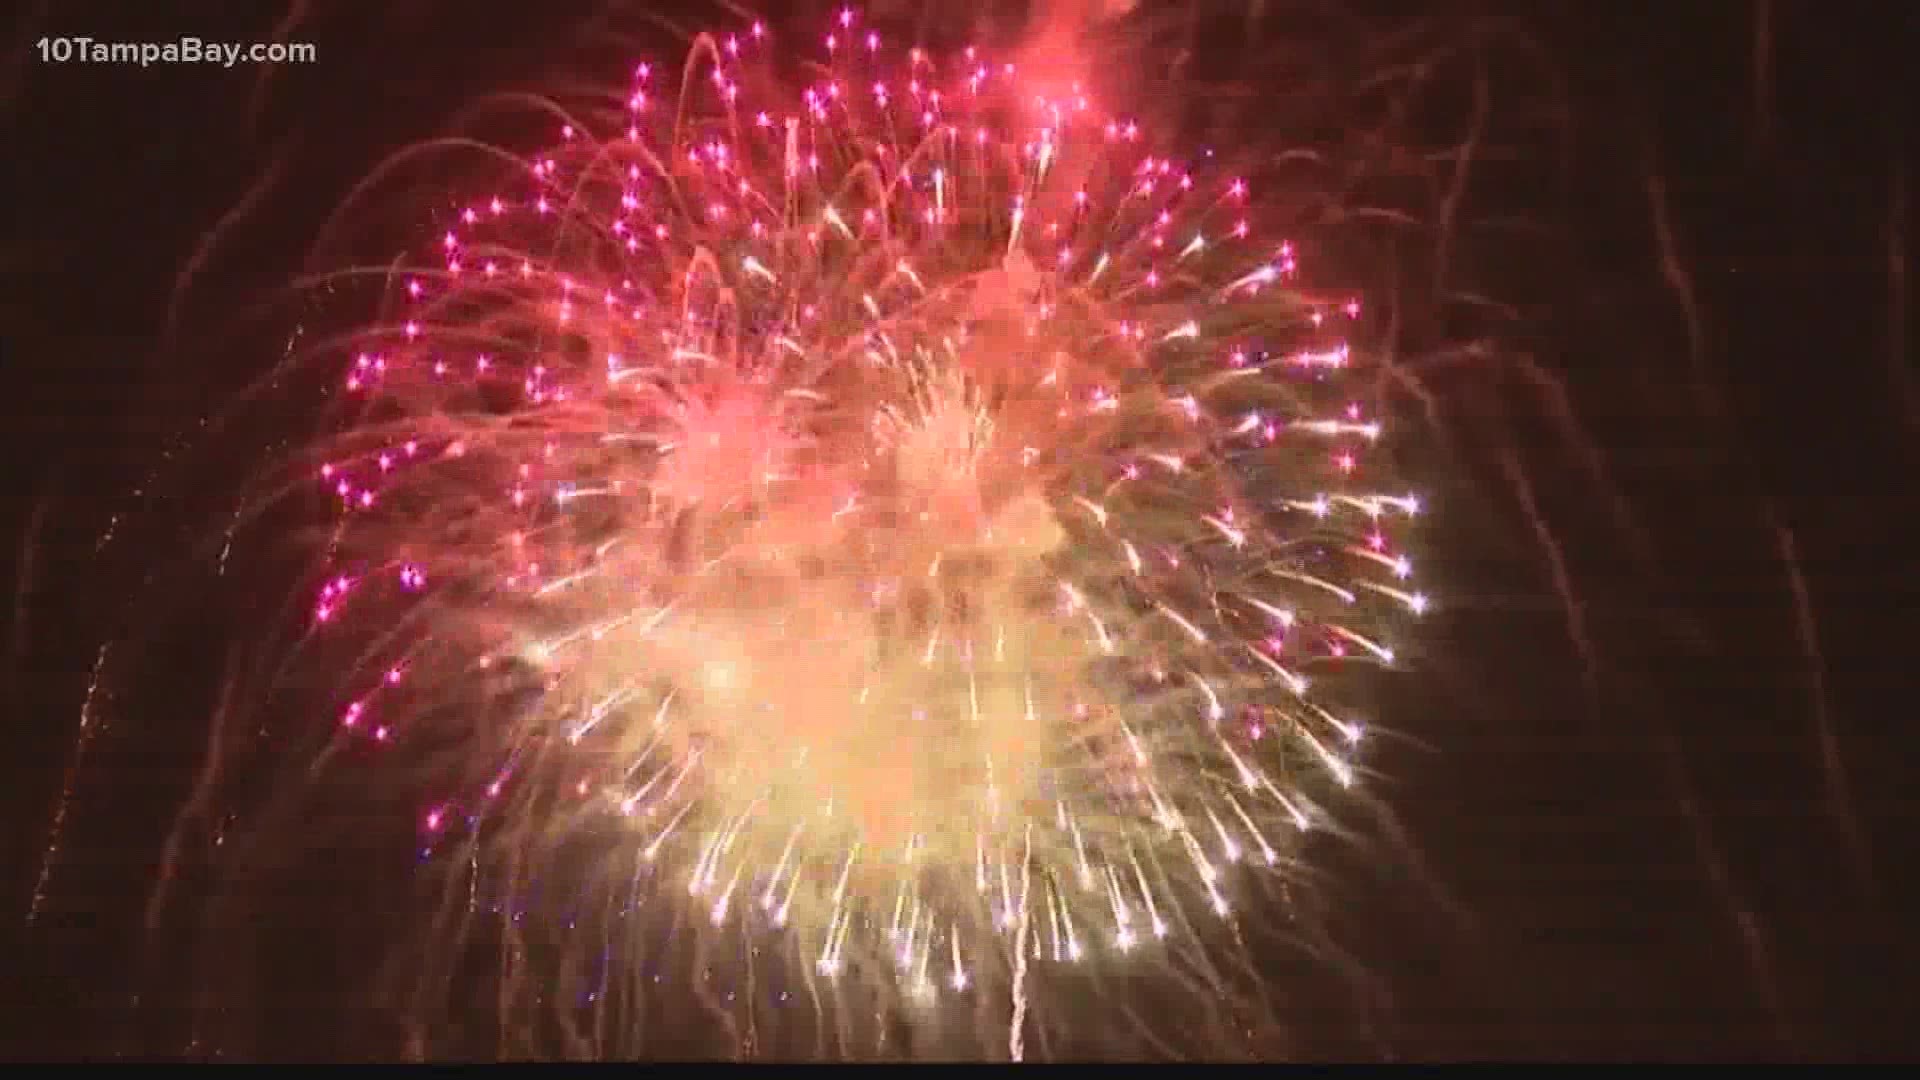 If you've got a minute, let us break down where all the colors come from for fireworks.